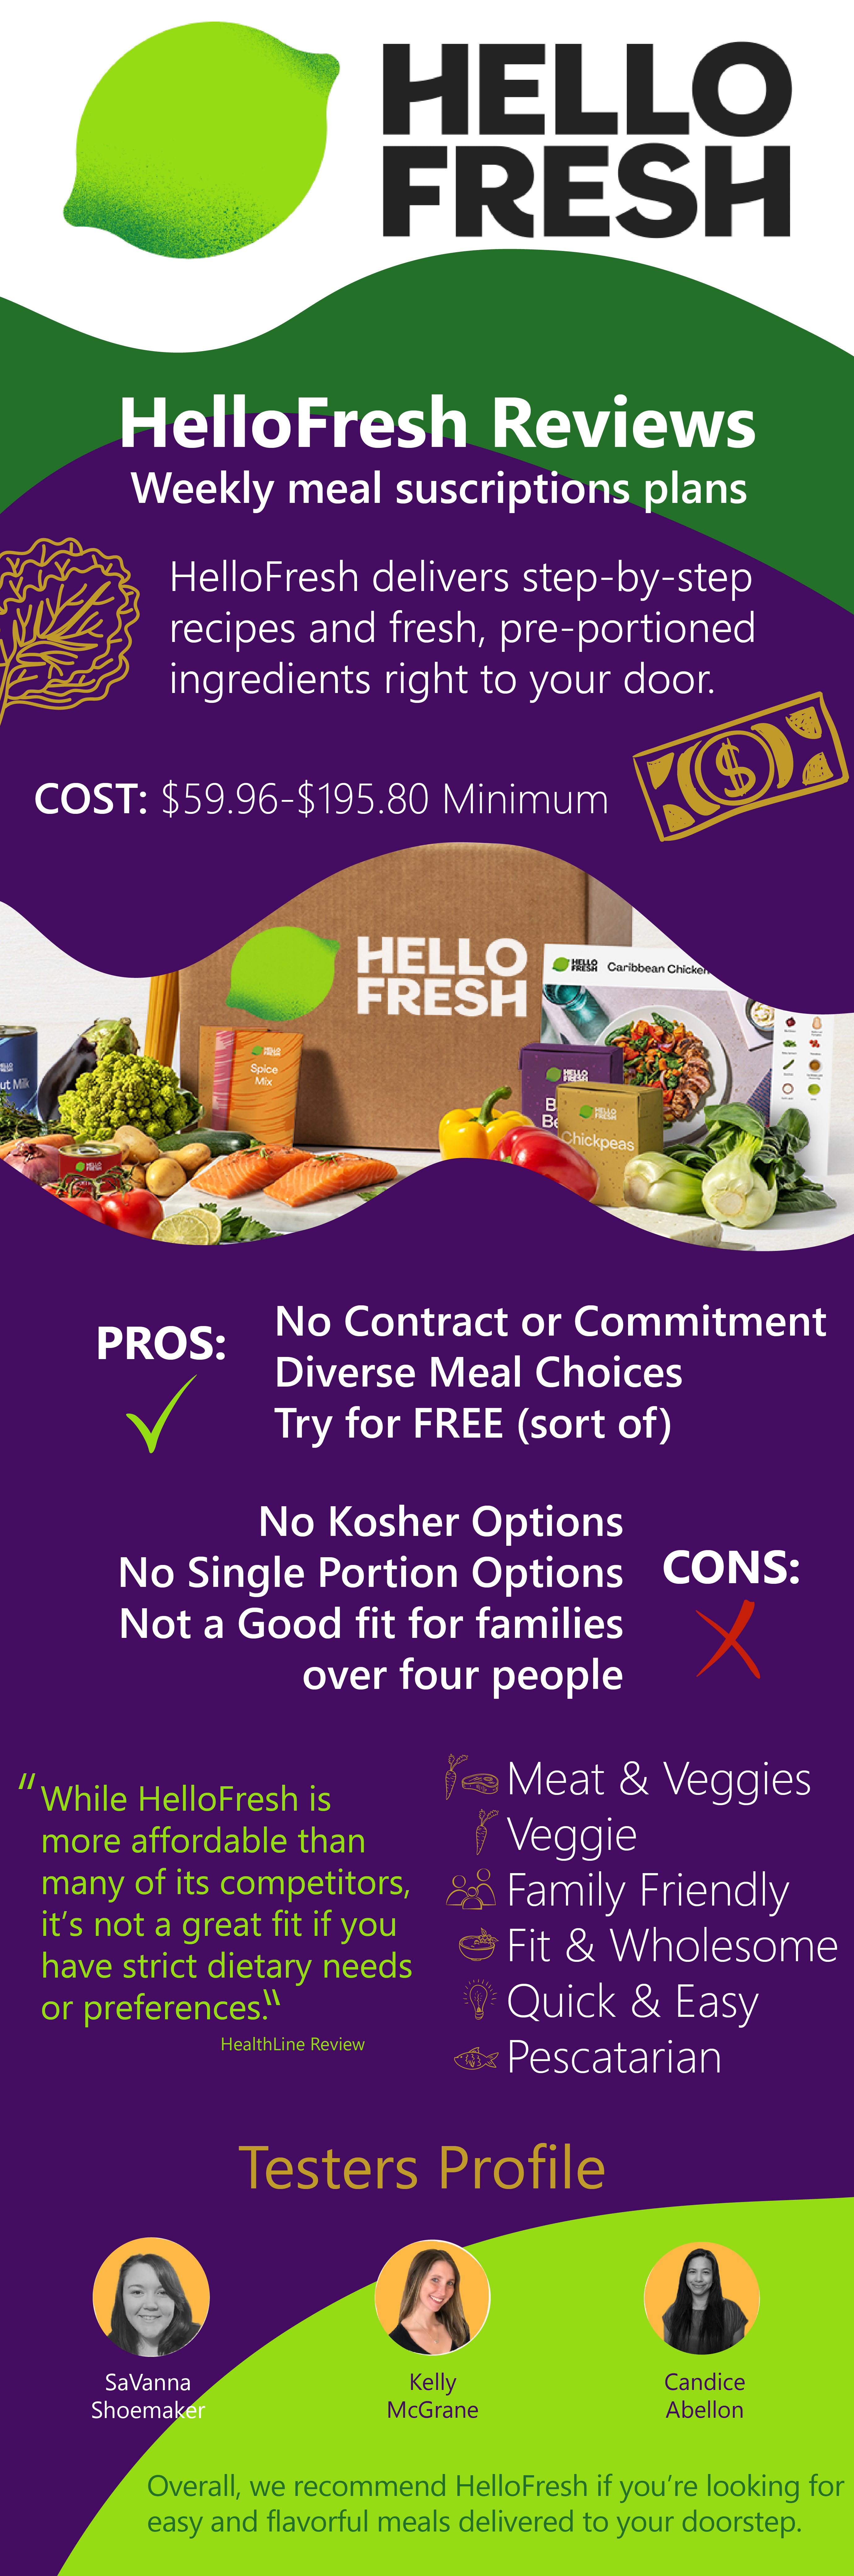 food delivery services reviews: HelloFresh